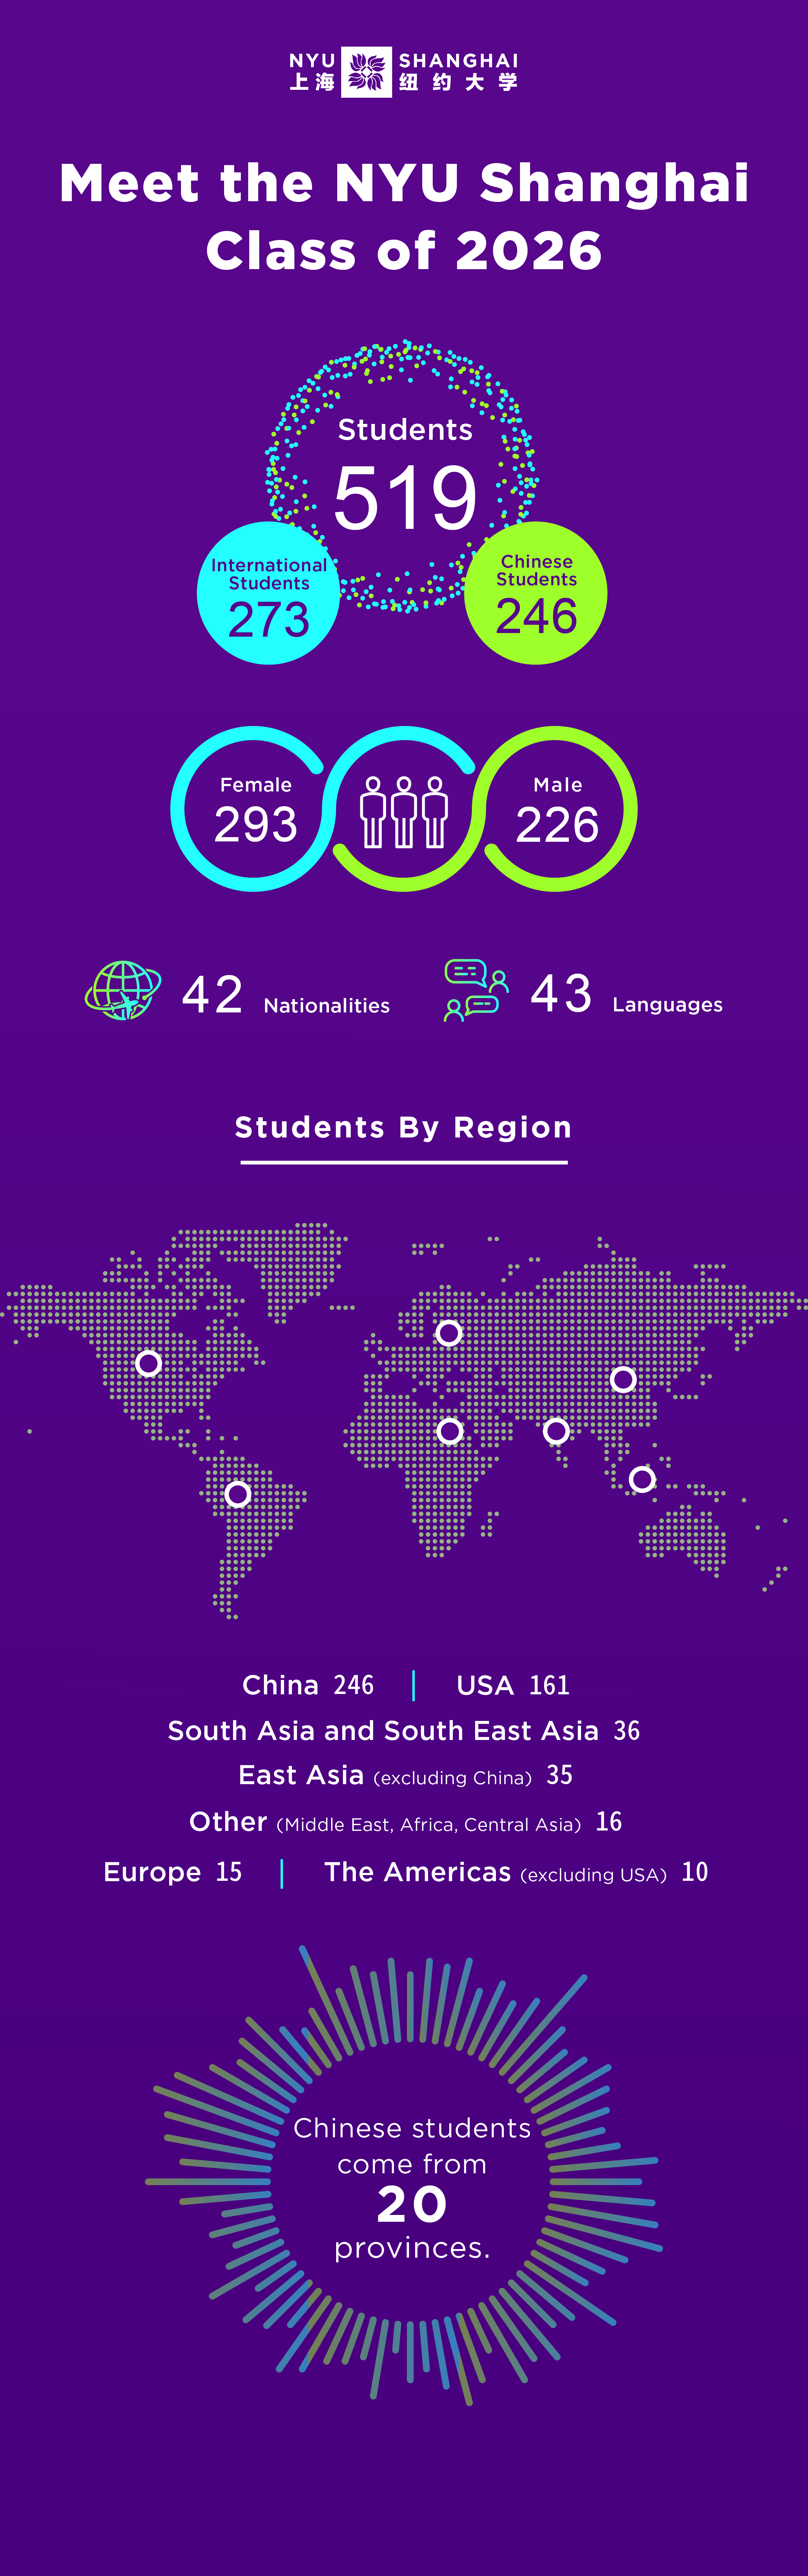 An infographic showing where class of 2026 students are coming from